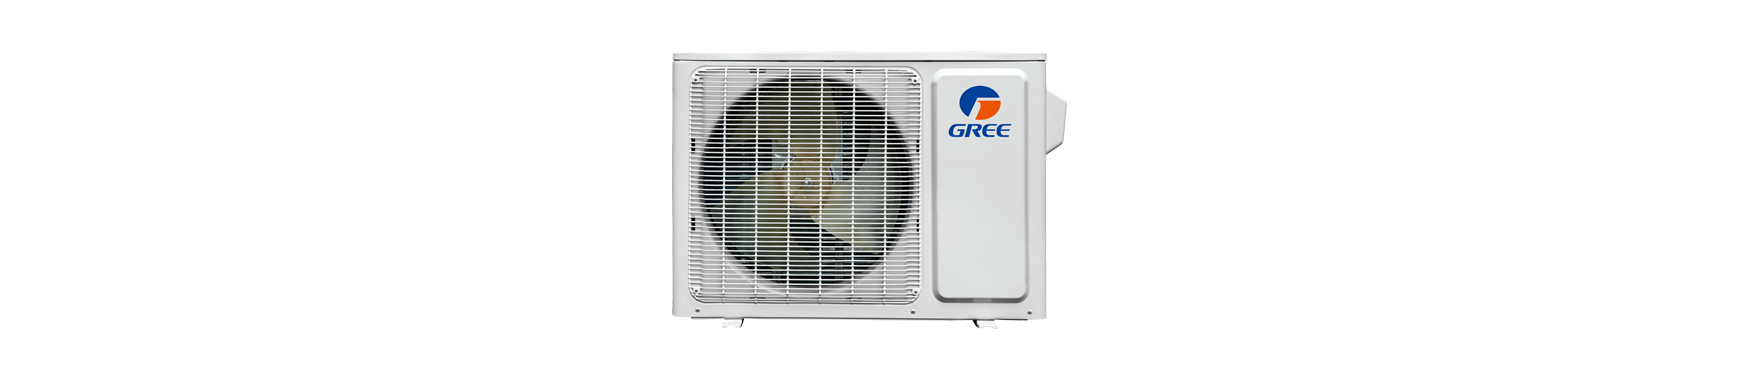 GREE Comfort Vireo GEN3 single-zone heating and cooling unit